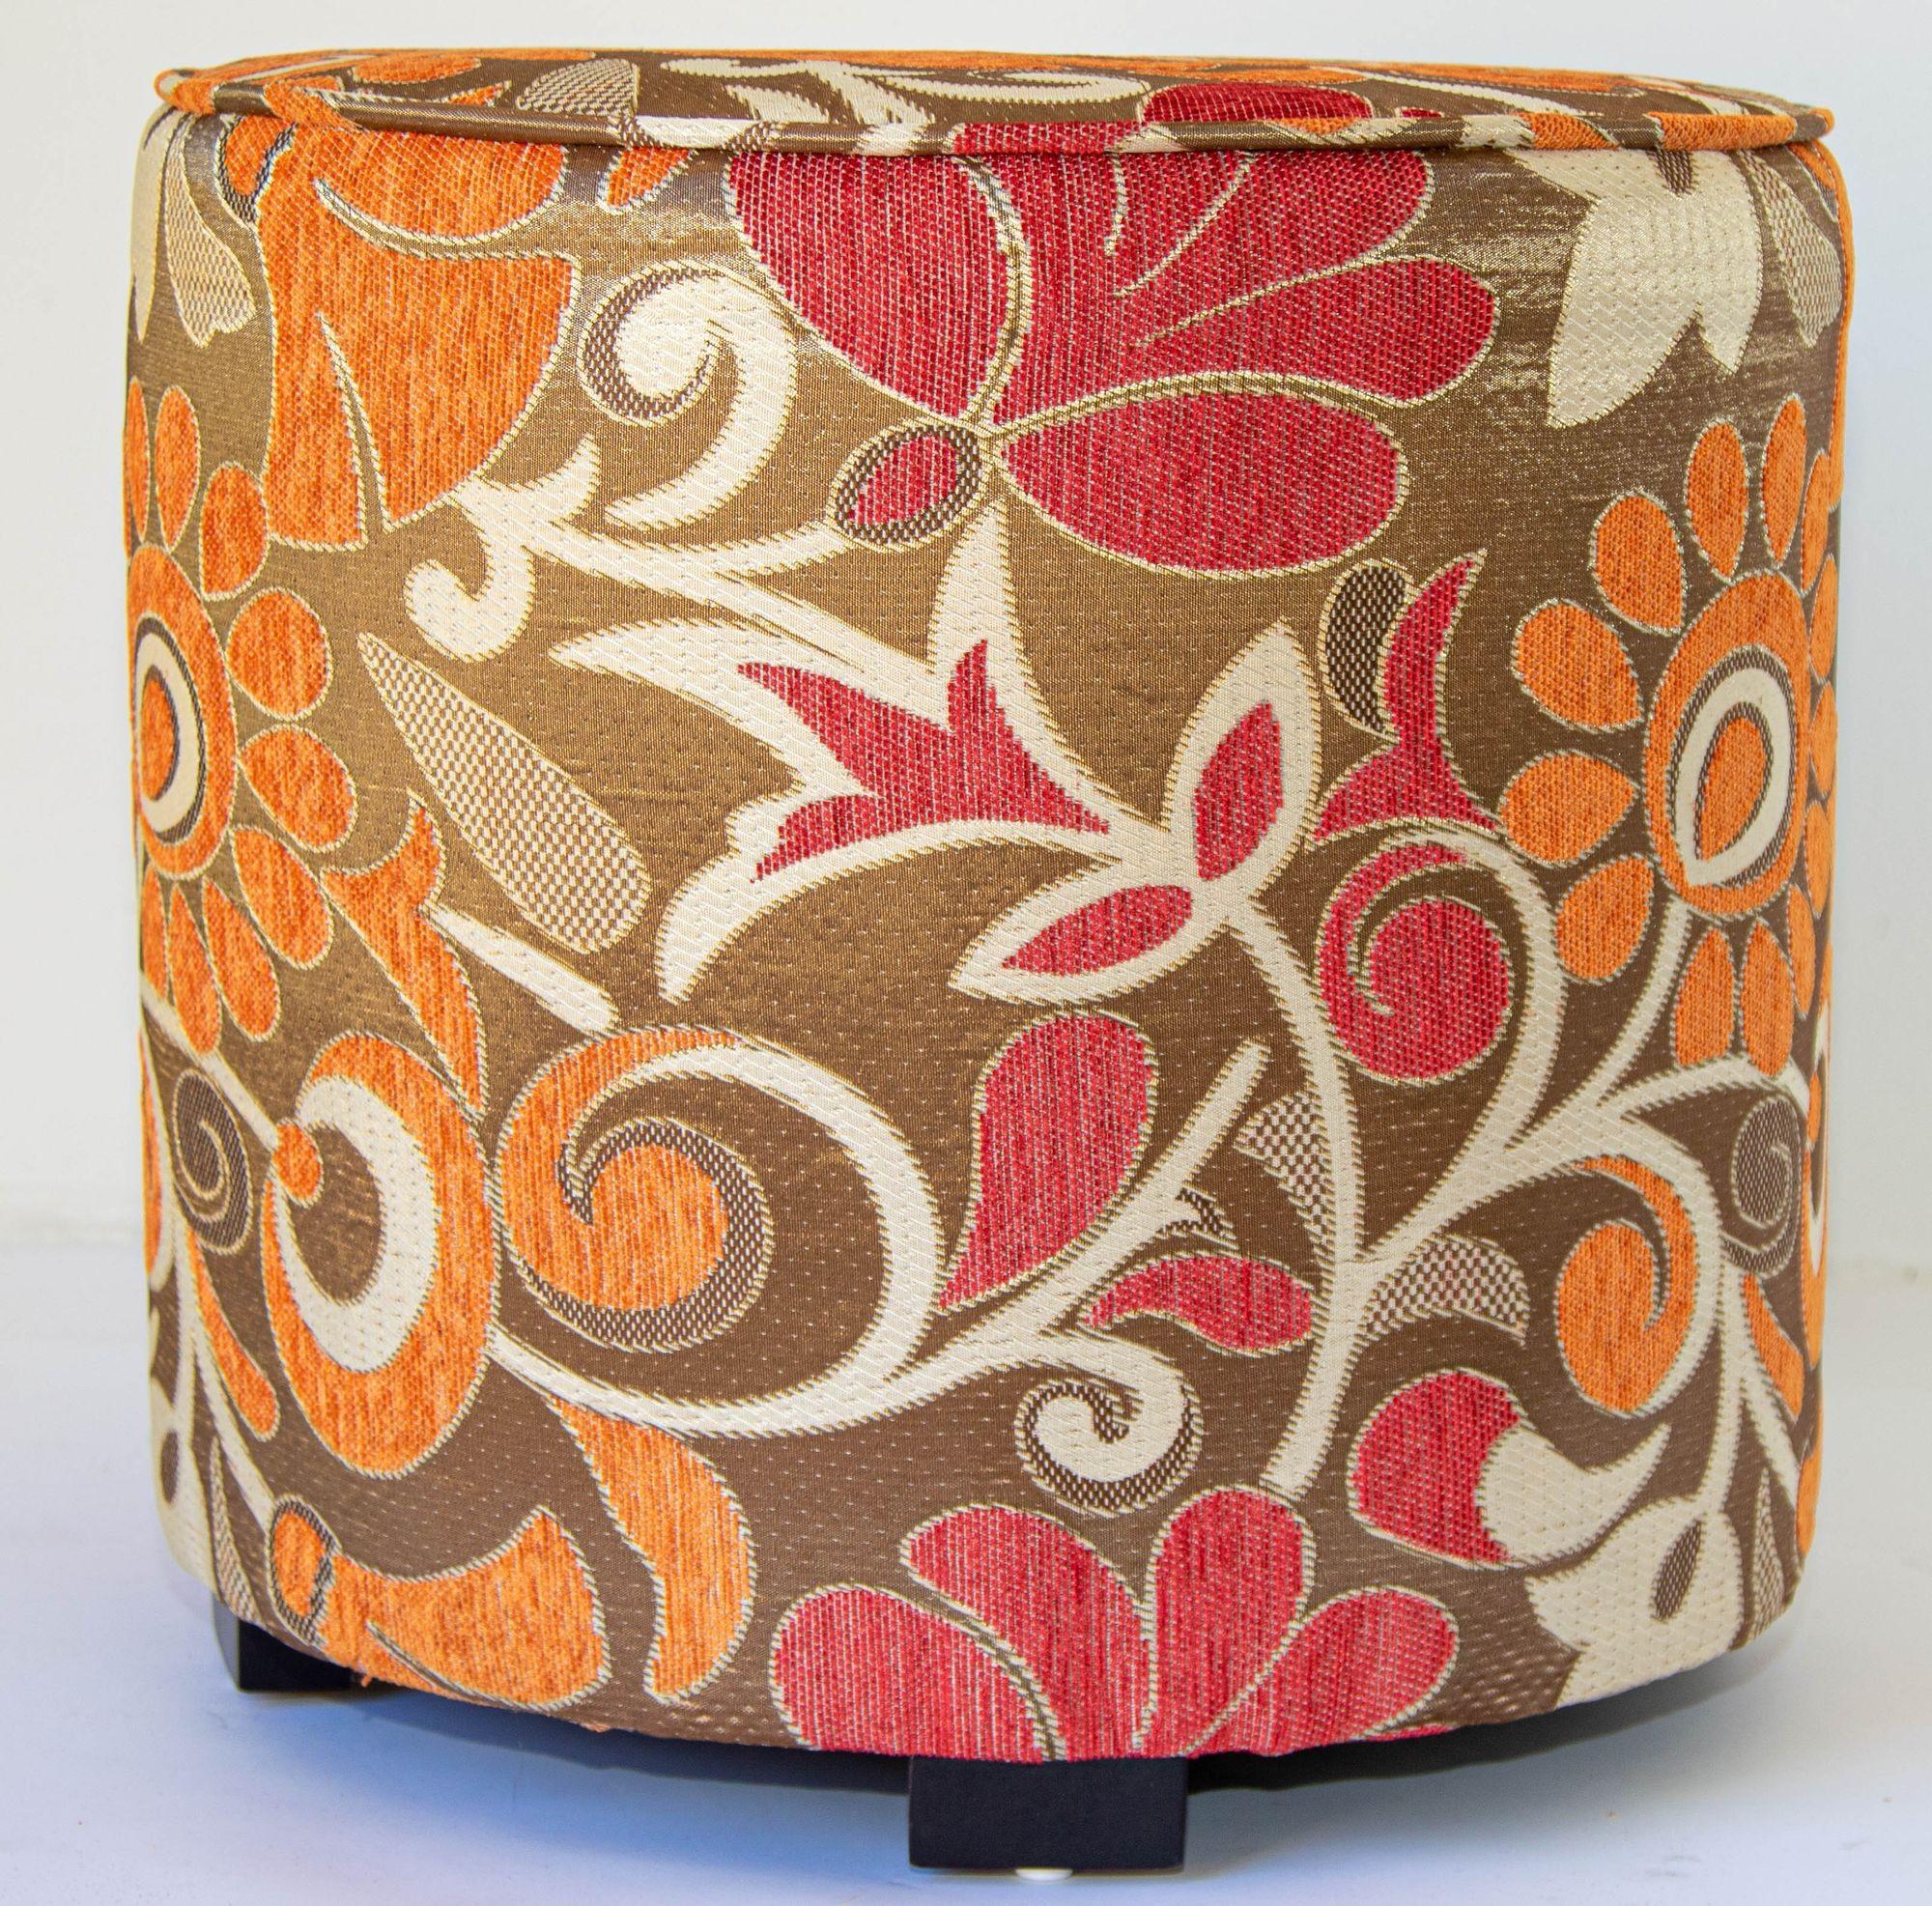 Vintage Bohemian Poufs in Post Modern Velvet Upholstered Stools 1970s Style In Good Condition For Sale In North Hollywood, CA